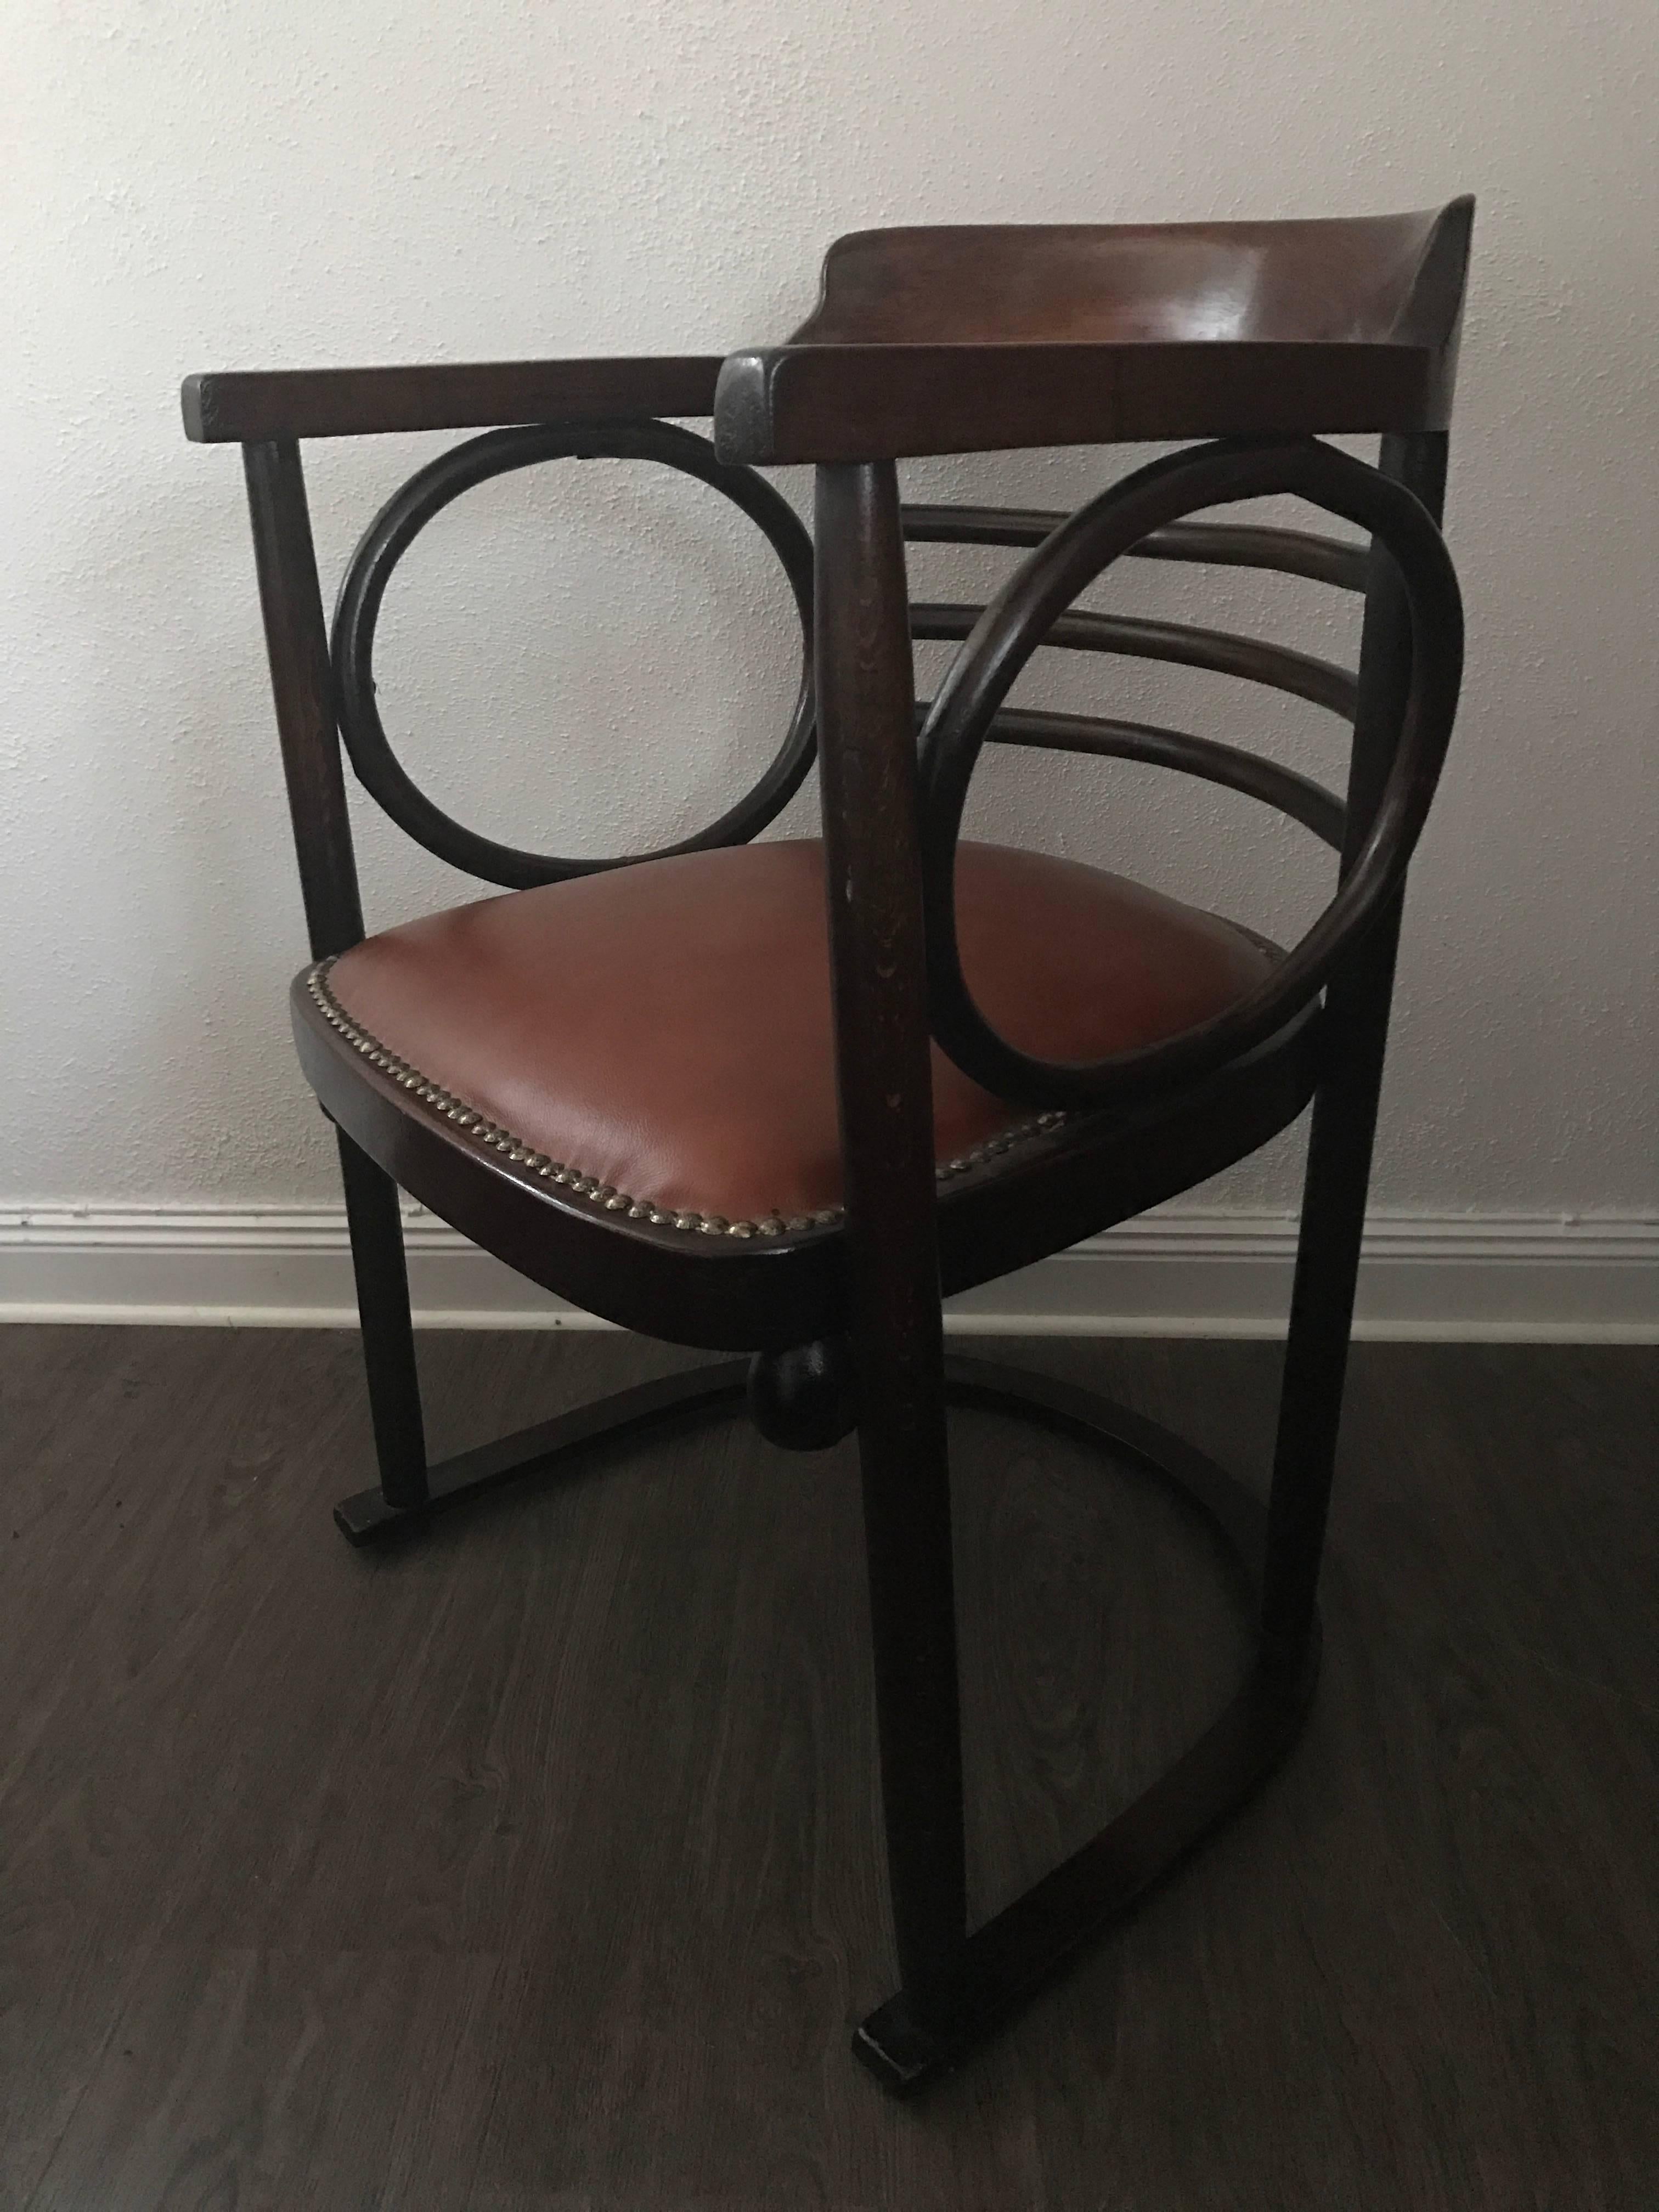 Early 20th Century Vienna Concession Fledermaus Armchair by Josef Hoffmann In Good Condition For Sale In Drottningholm, SE